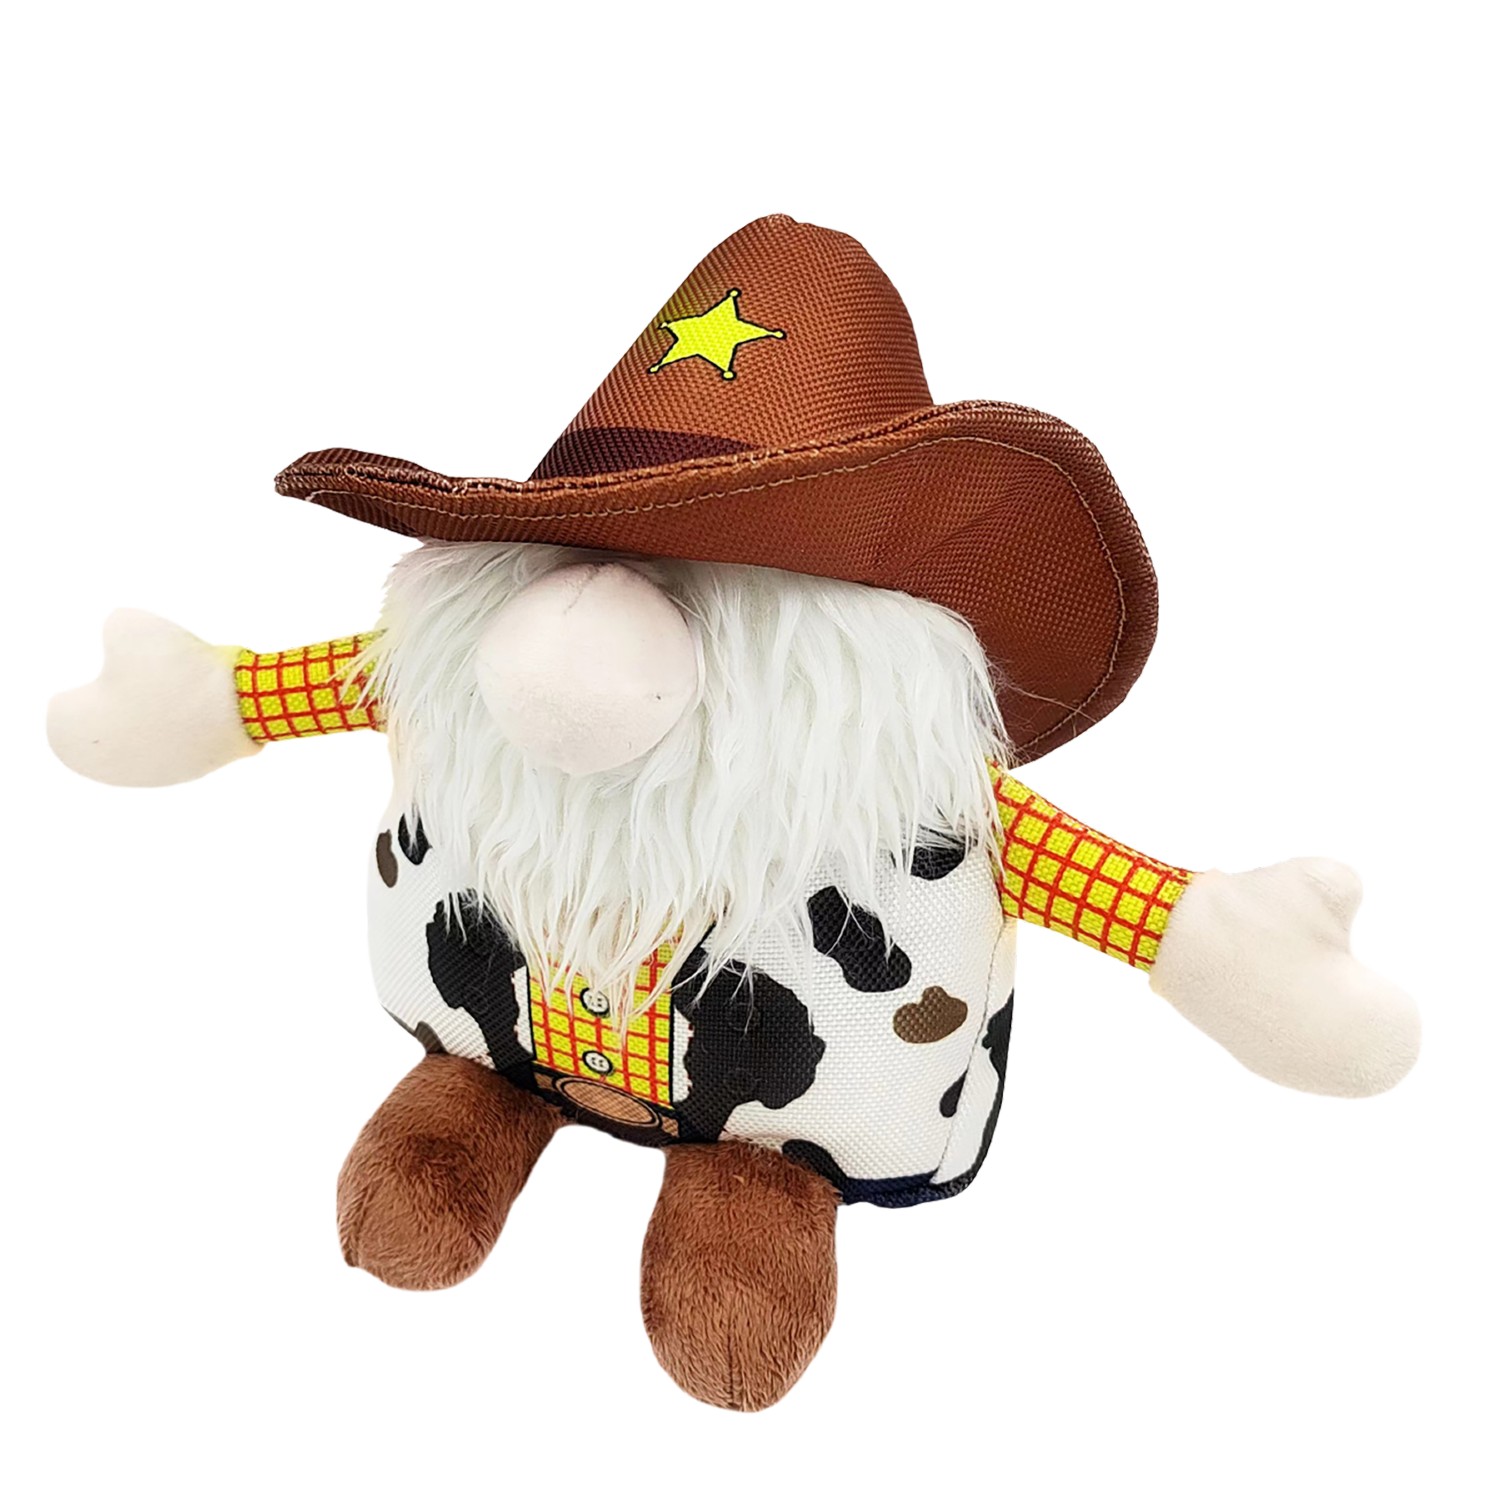 Happy Tails Doodles Gnome Dog Toy - Deputy with Brown Hat and Yellow Star